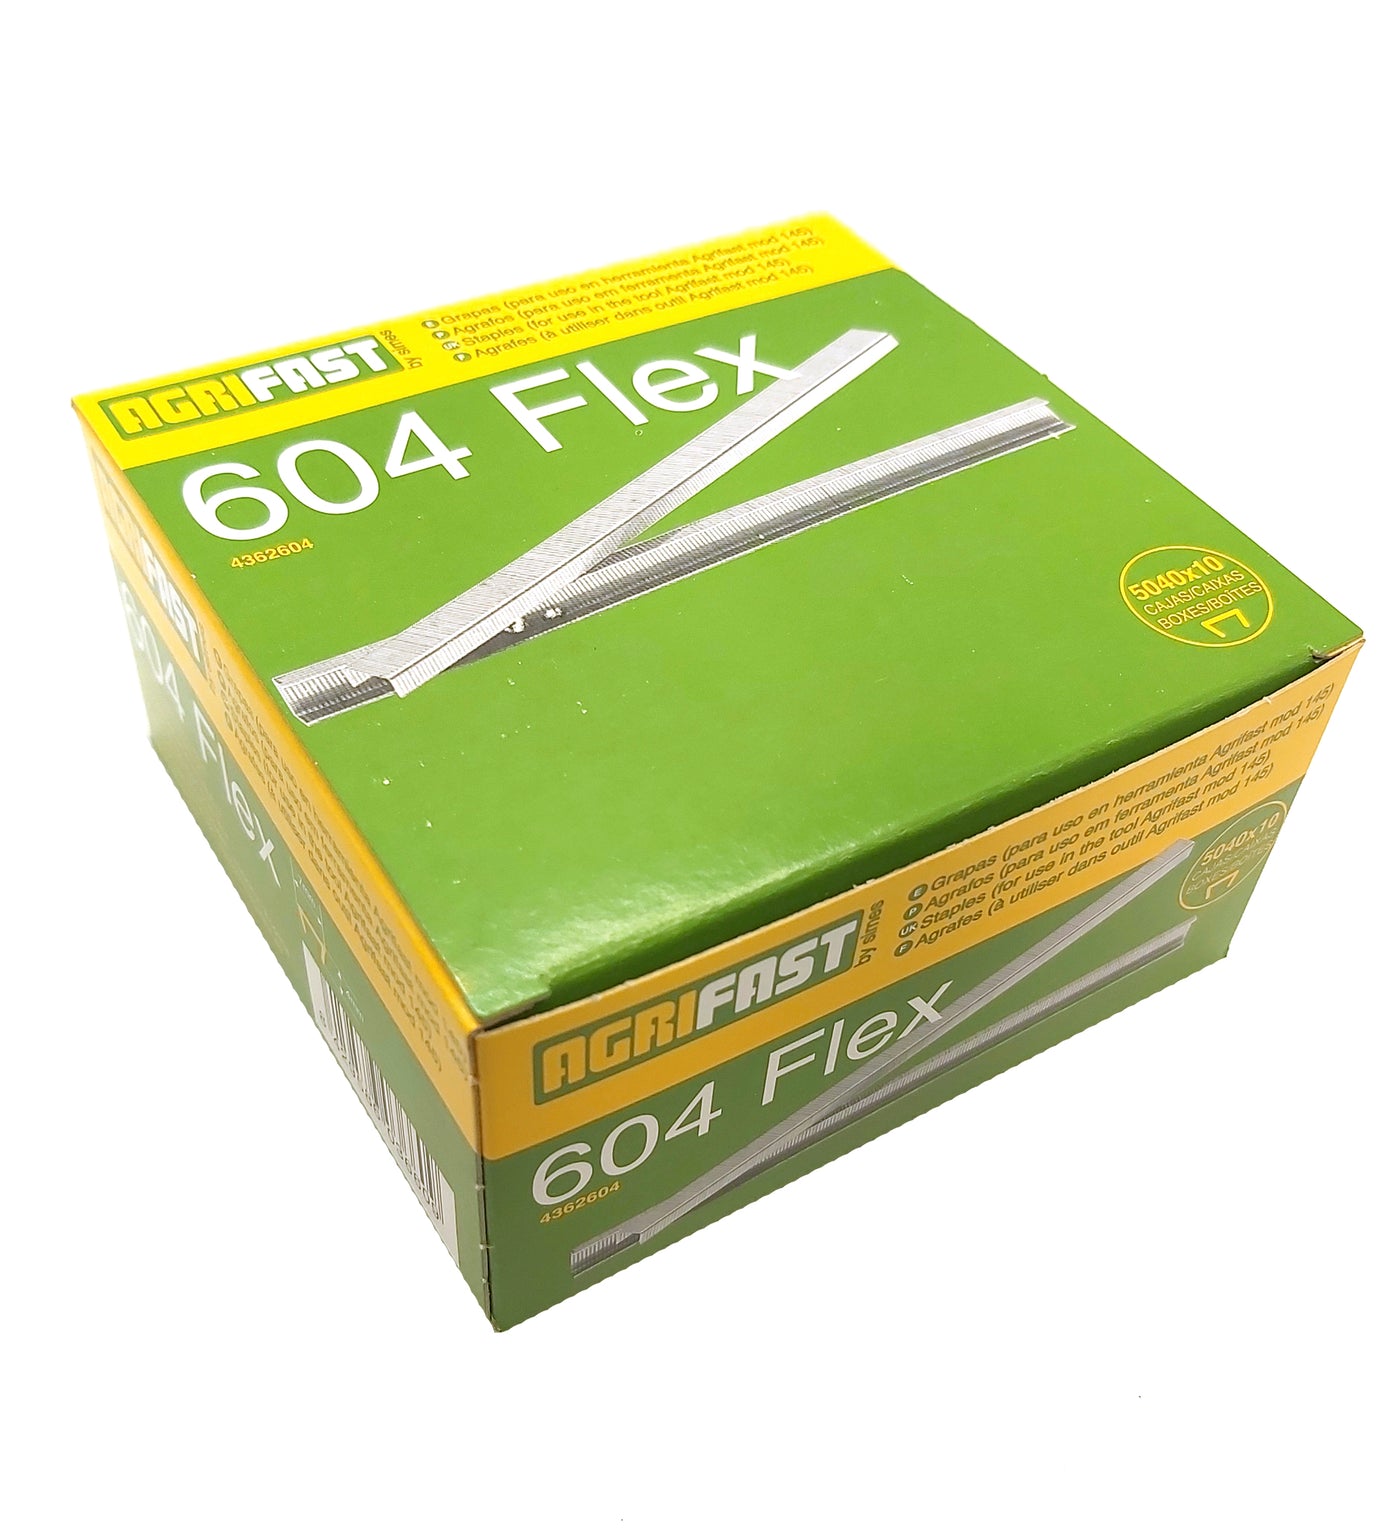 Box of 10 Agrifast by Simes 604 FLEX STAPLES TTST5040 designed for use with the Simes TT145 Tape Tool System